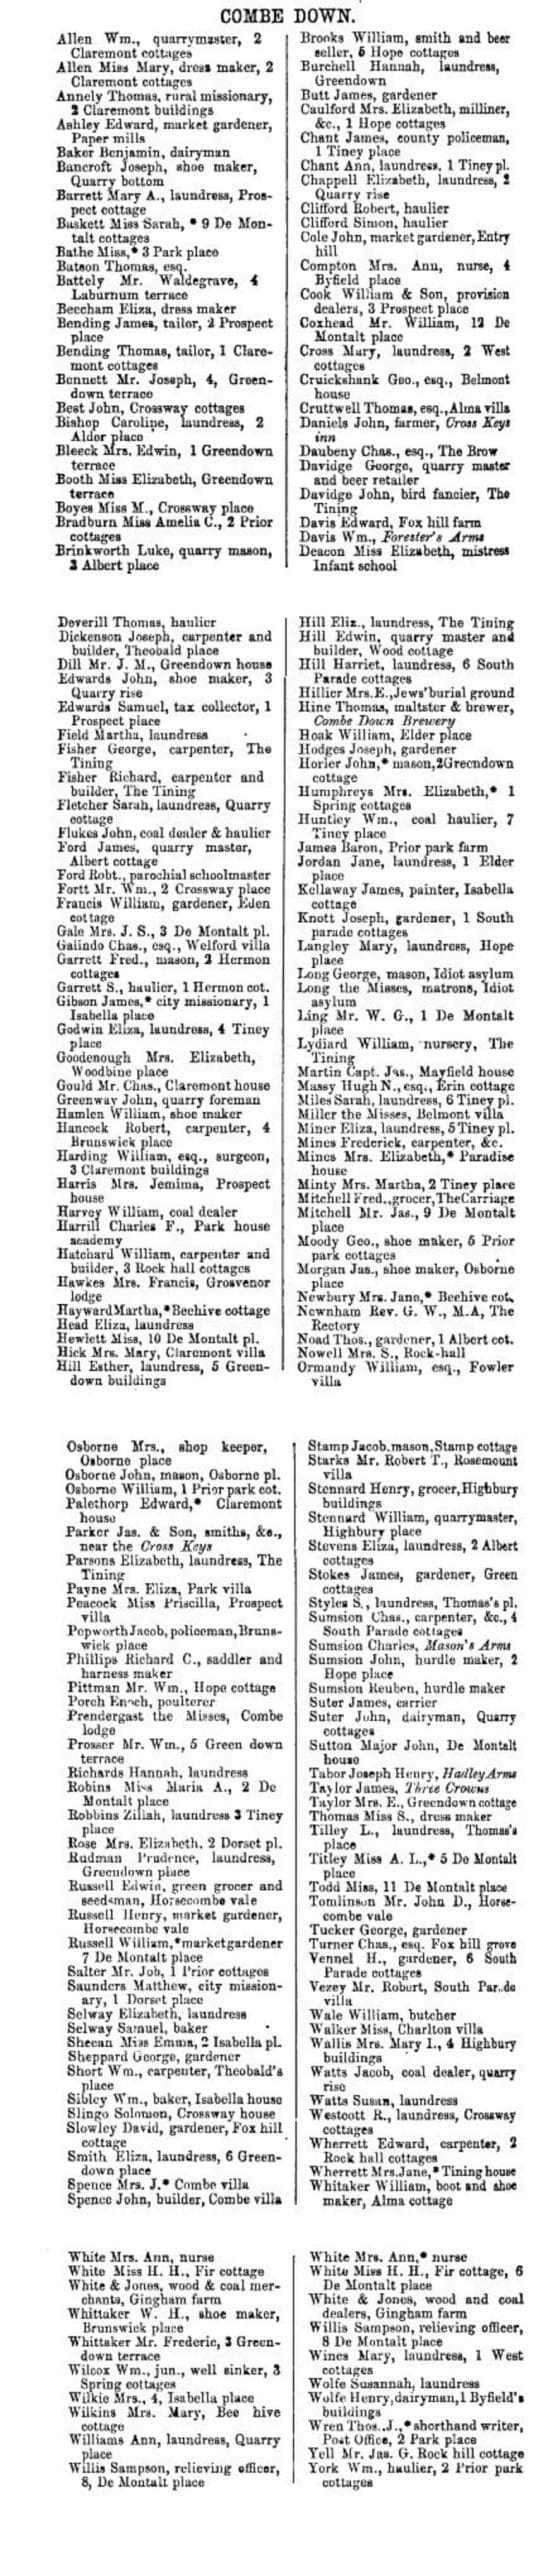 1864 - 65 Post Office Directory for Combe Down